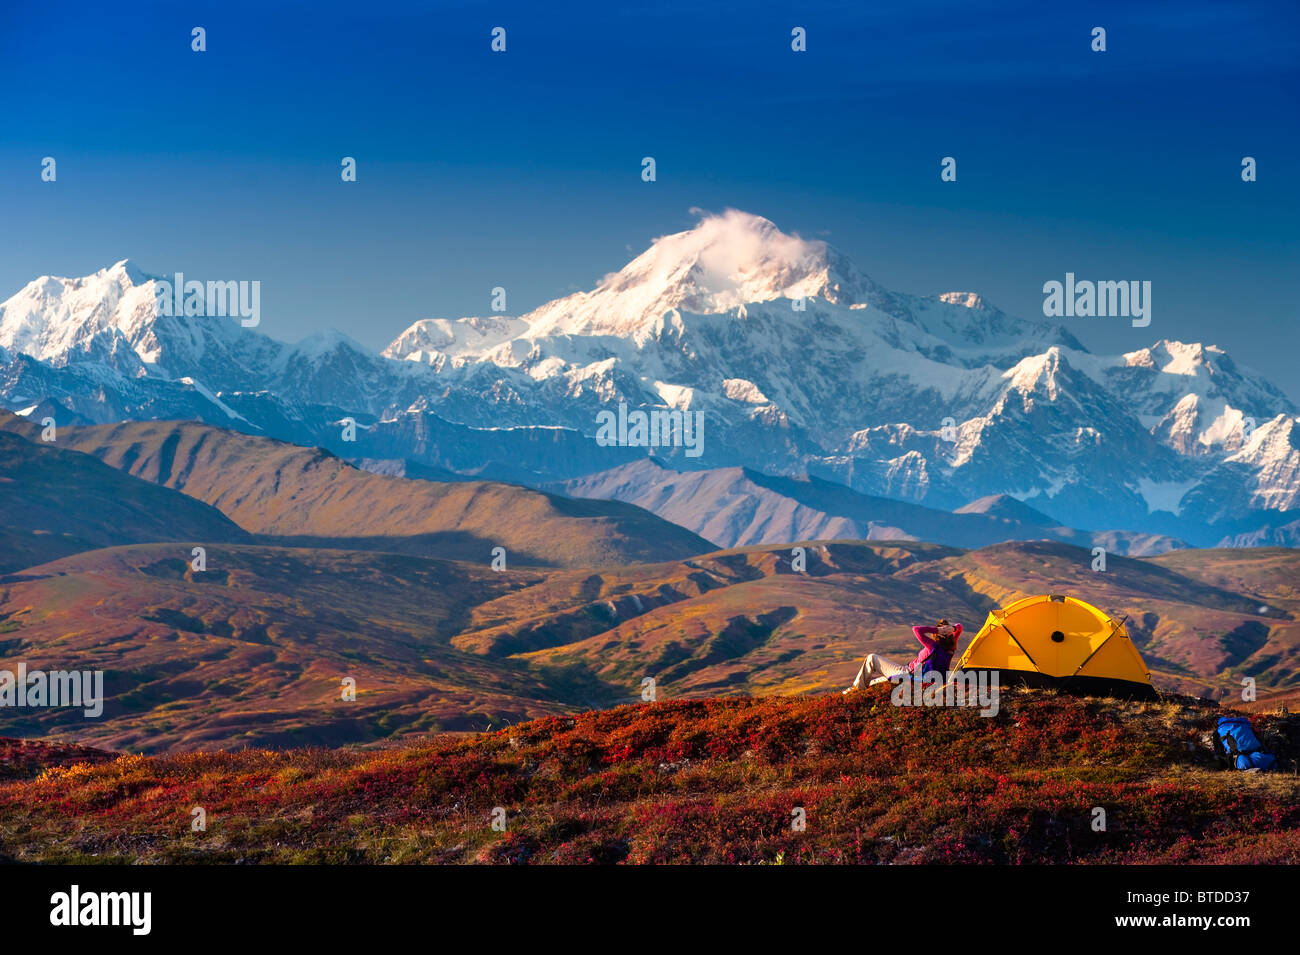 A woman relaxes next to her tent in Peters Hills with a view of Mt. McKinley in the background, Denali State Park,  Alaska, Fall Stock Photo